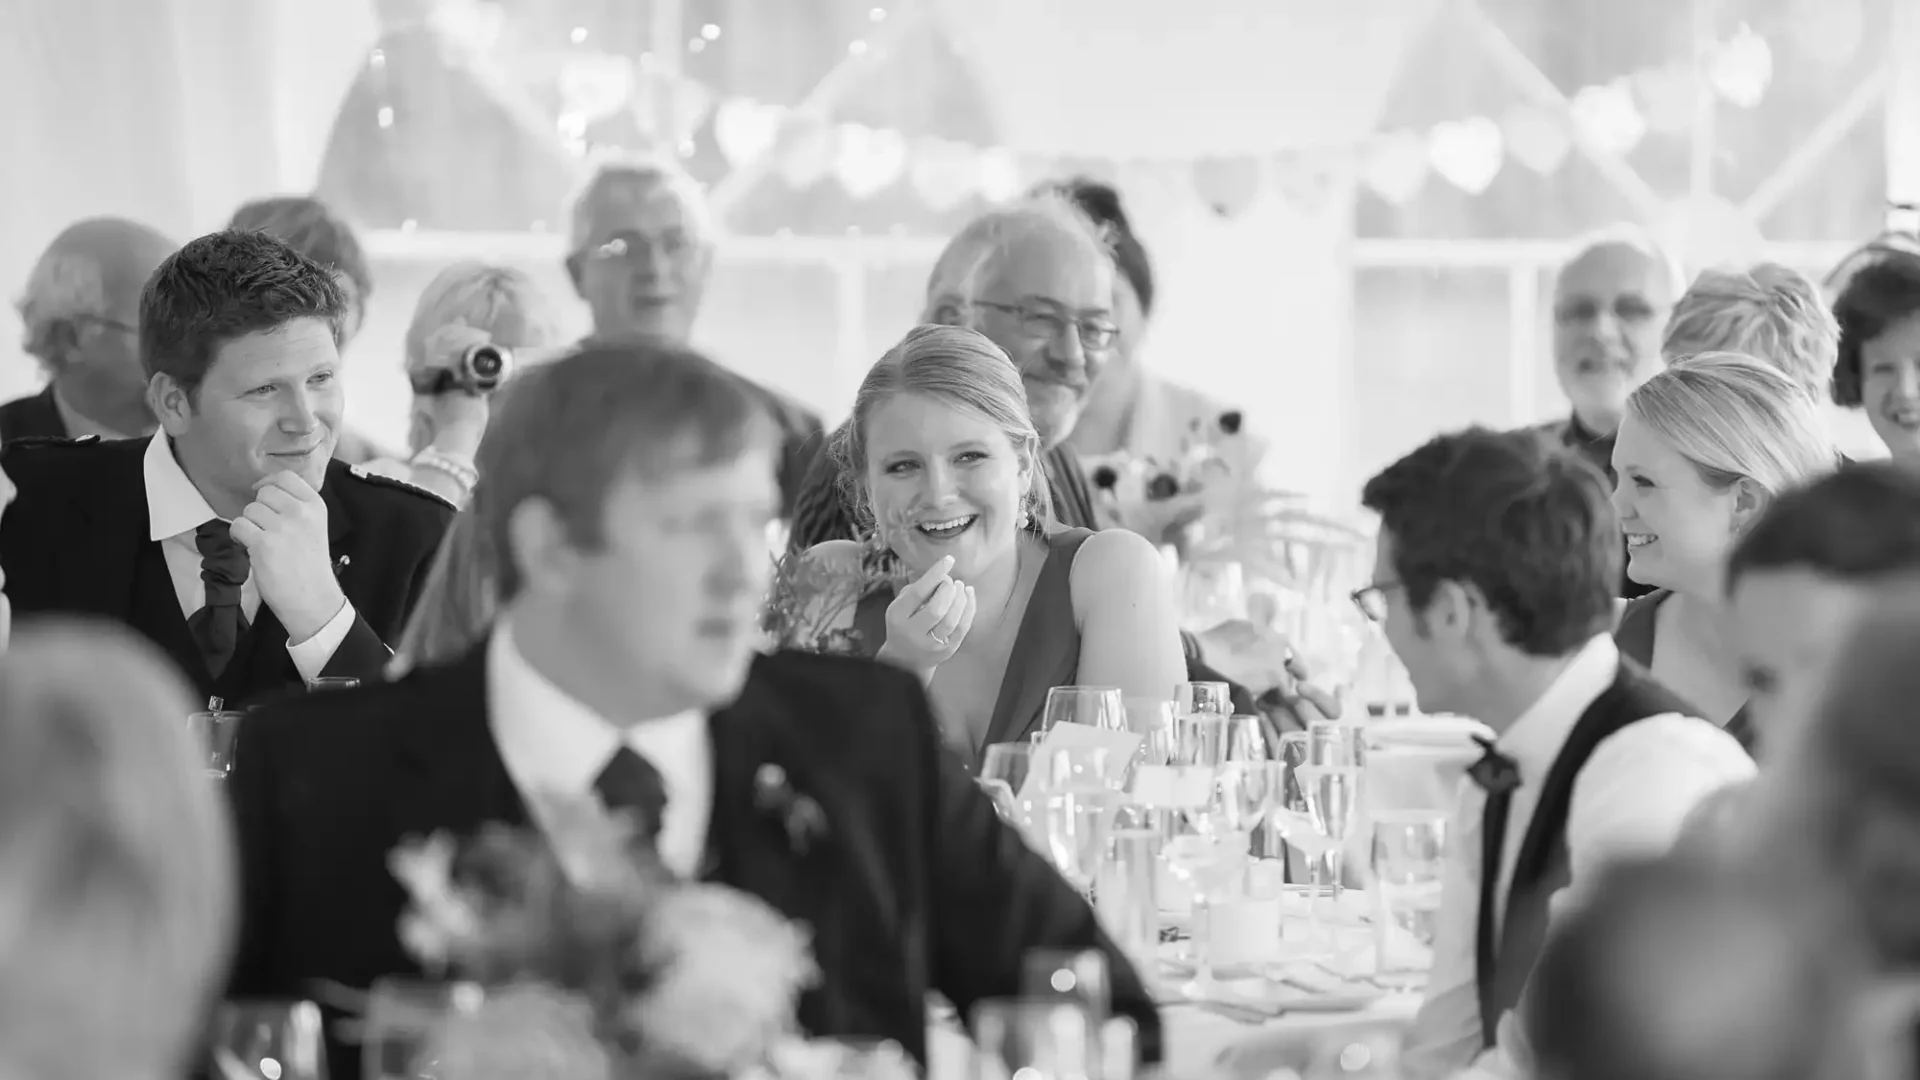 A black and white photo of people seated at a wedding reception, smiling and talking, with a festive atmosphere.